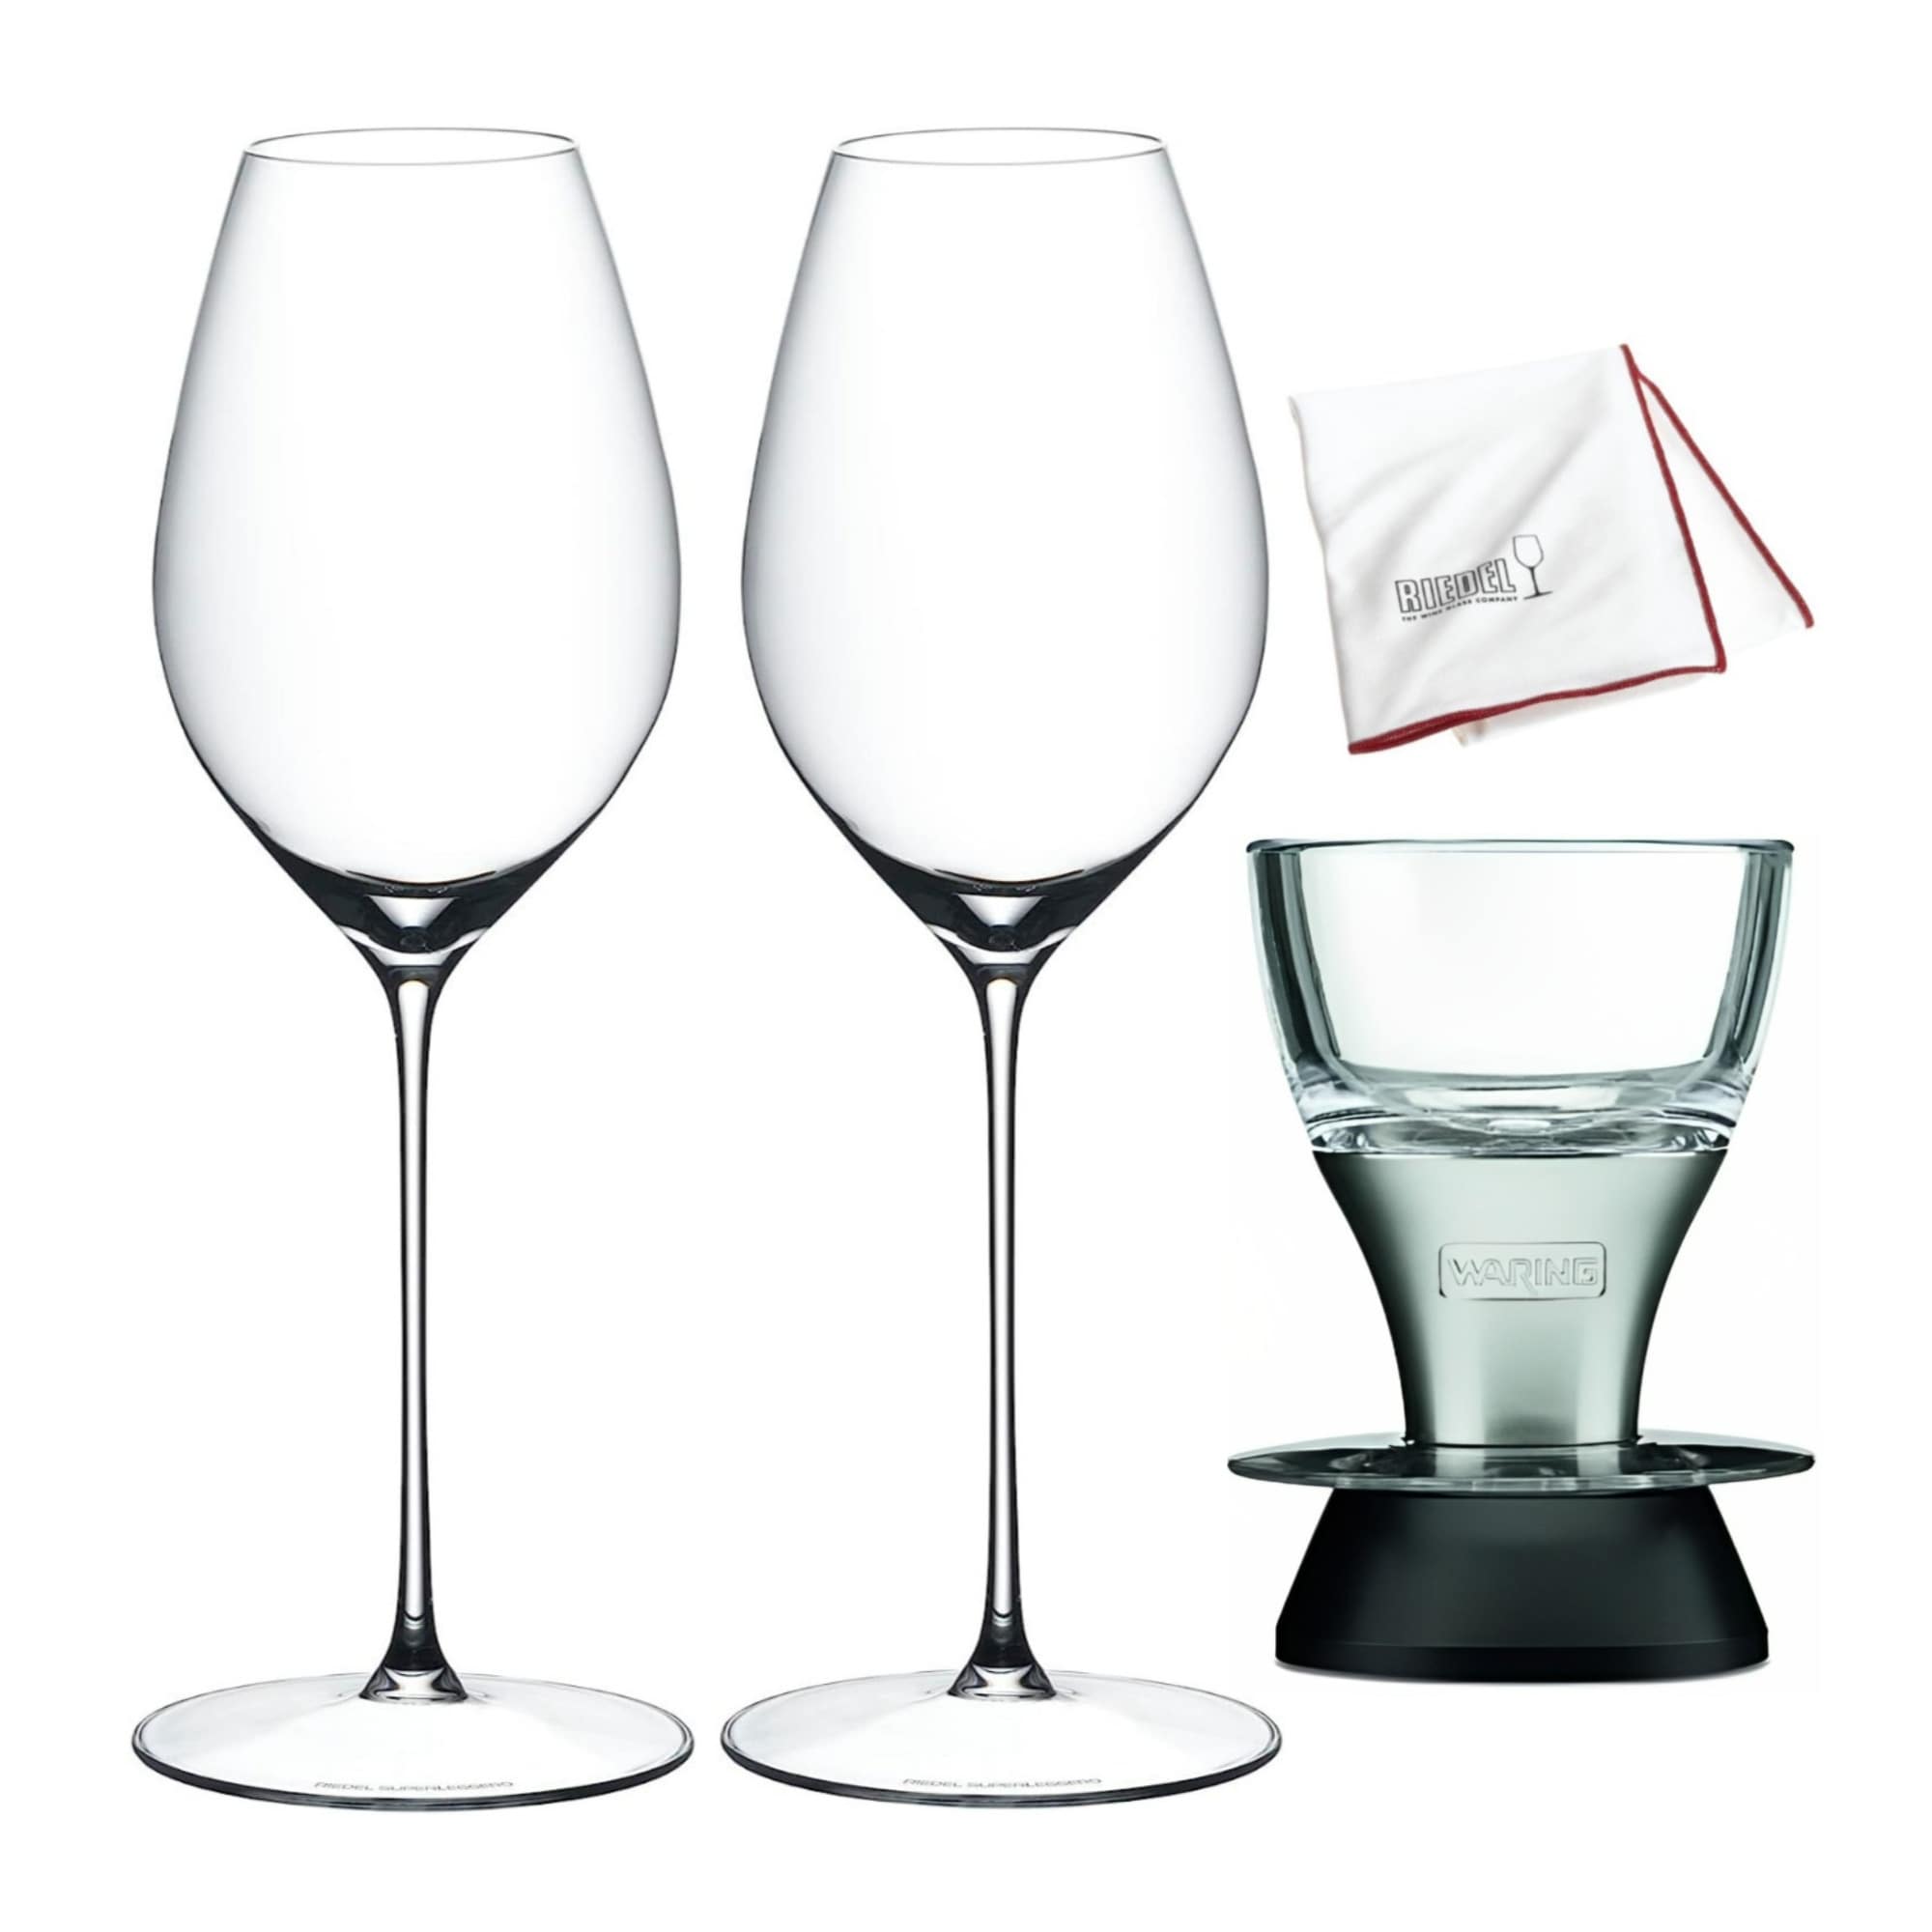 https://ak1.ostkcdn.com/images/products/is/images/direct/fbf6d99ec8d90acaf54e57f34c529ebb6b615c00/Riedel-Champagne-Crystal-Wine-2-Glasses-w-Aerator%2C-and-Polishing-Cloth.jpg